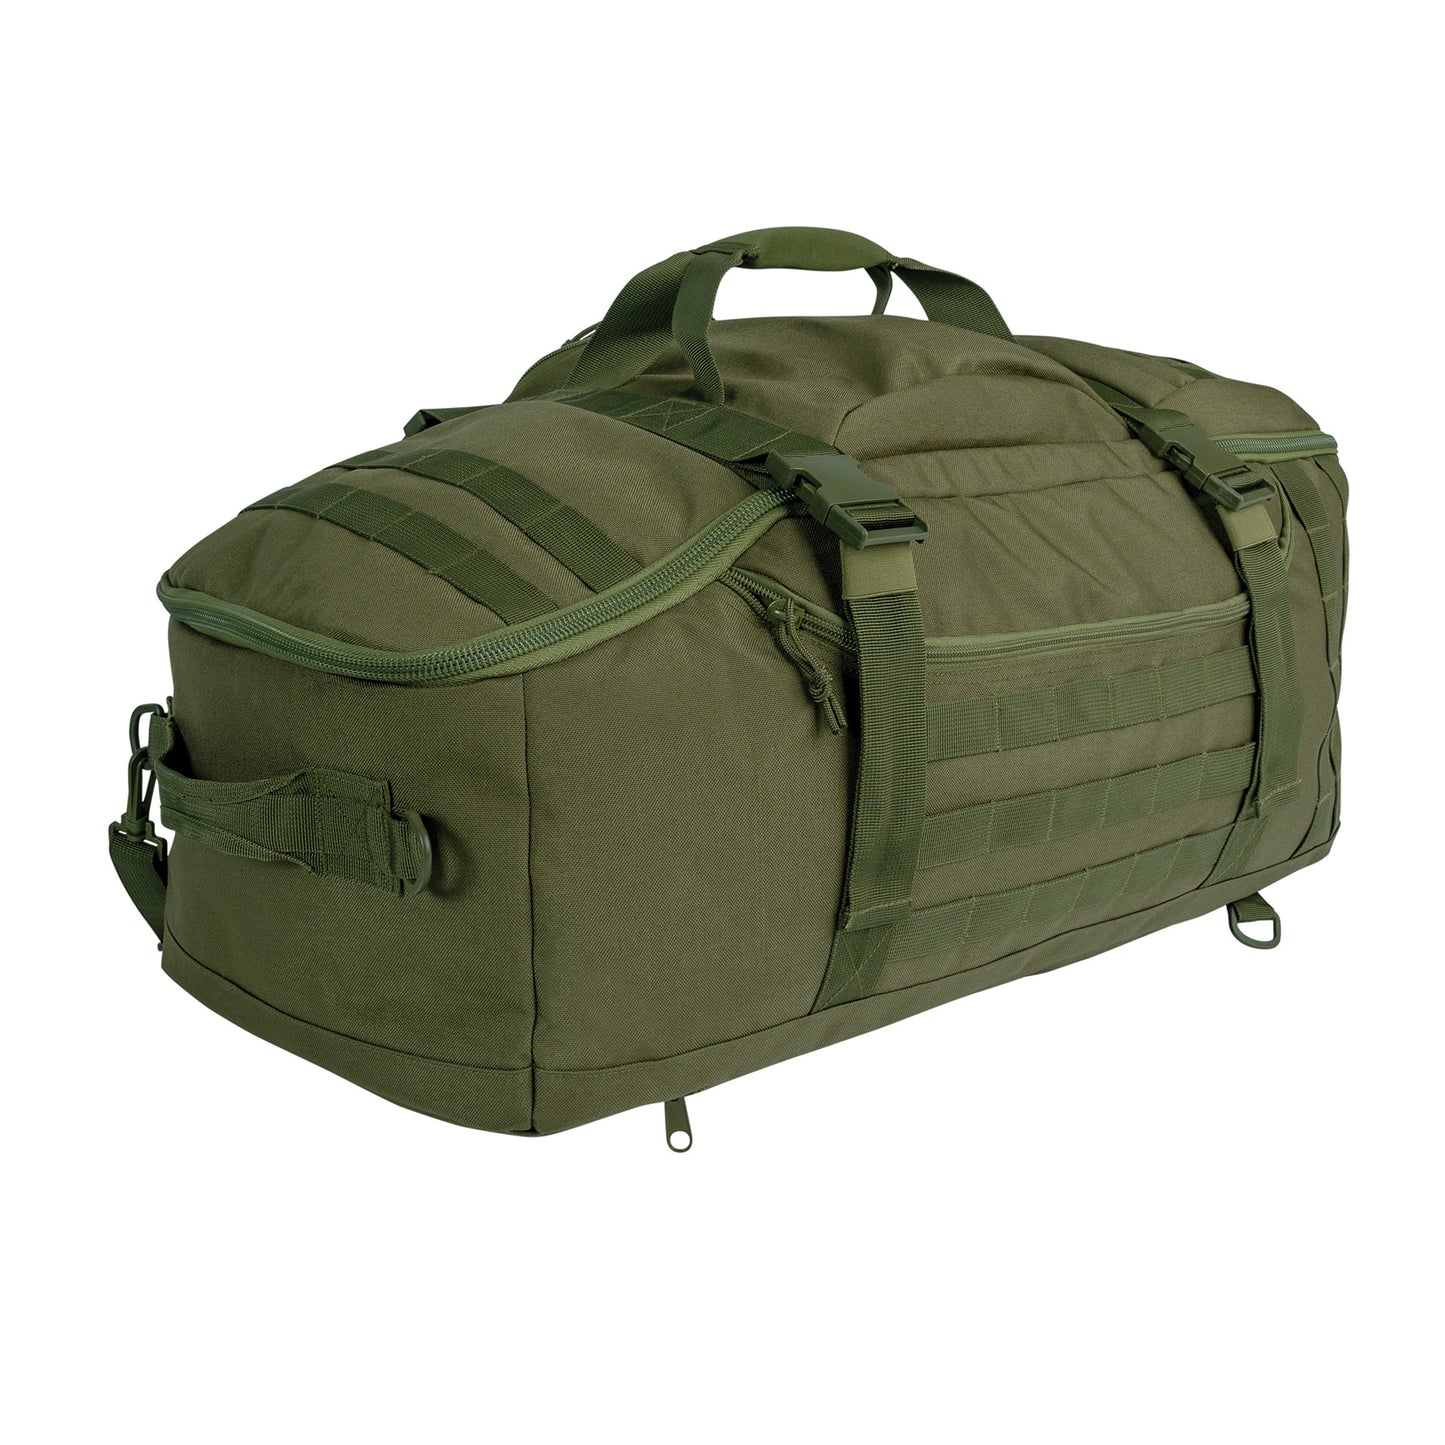 Rothco 3-In-1 Convertible Mission Travel Duffle Bag Backpack